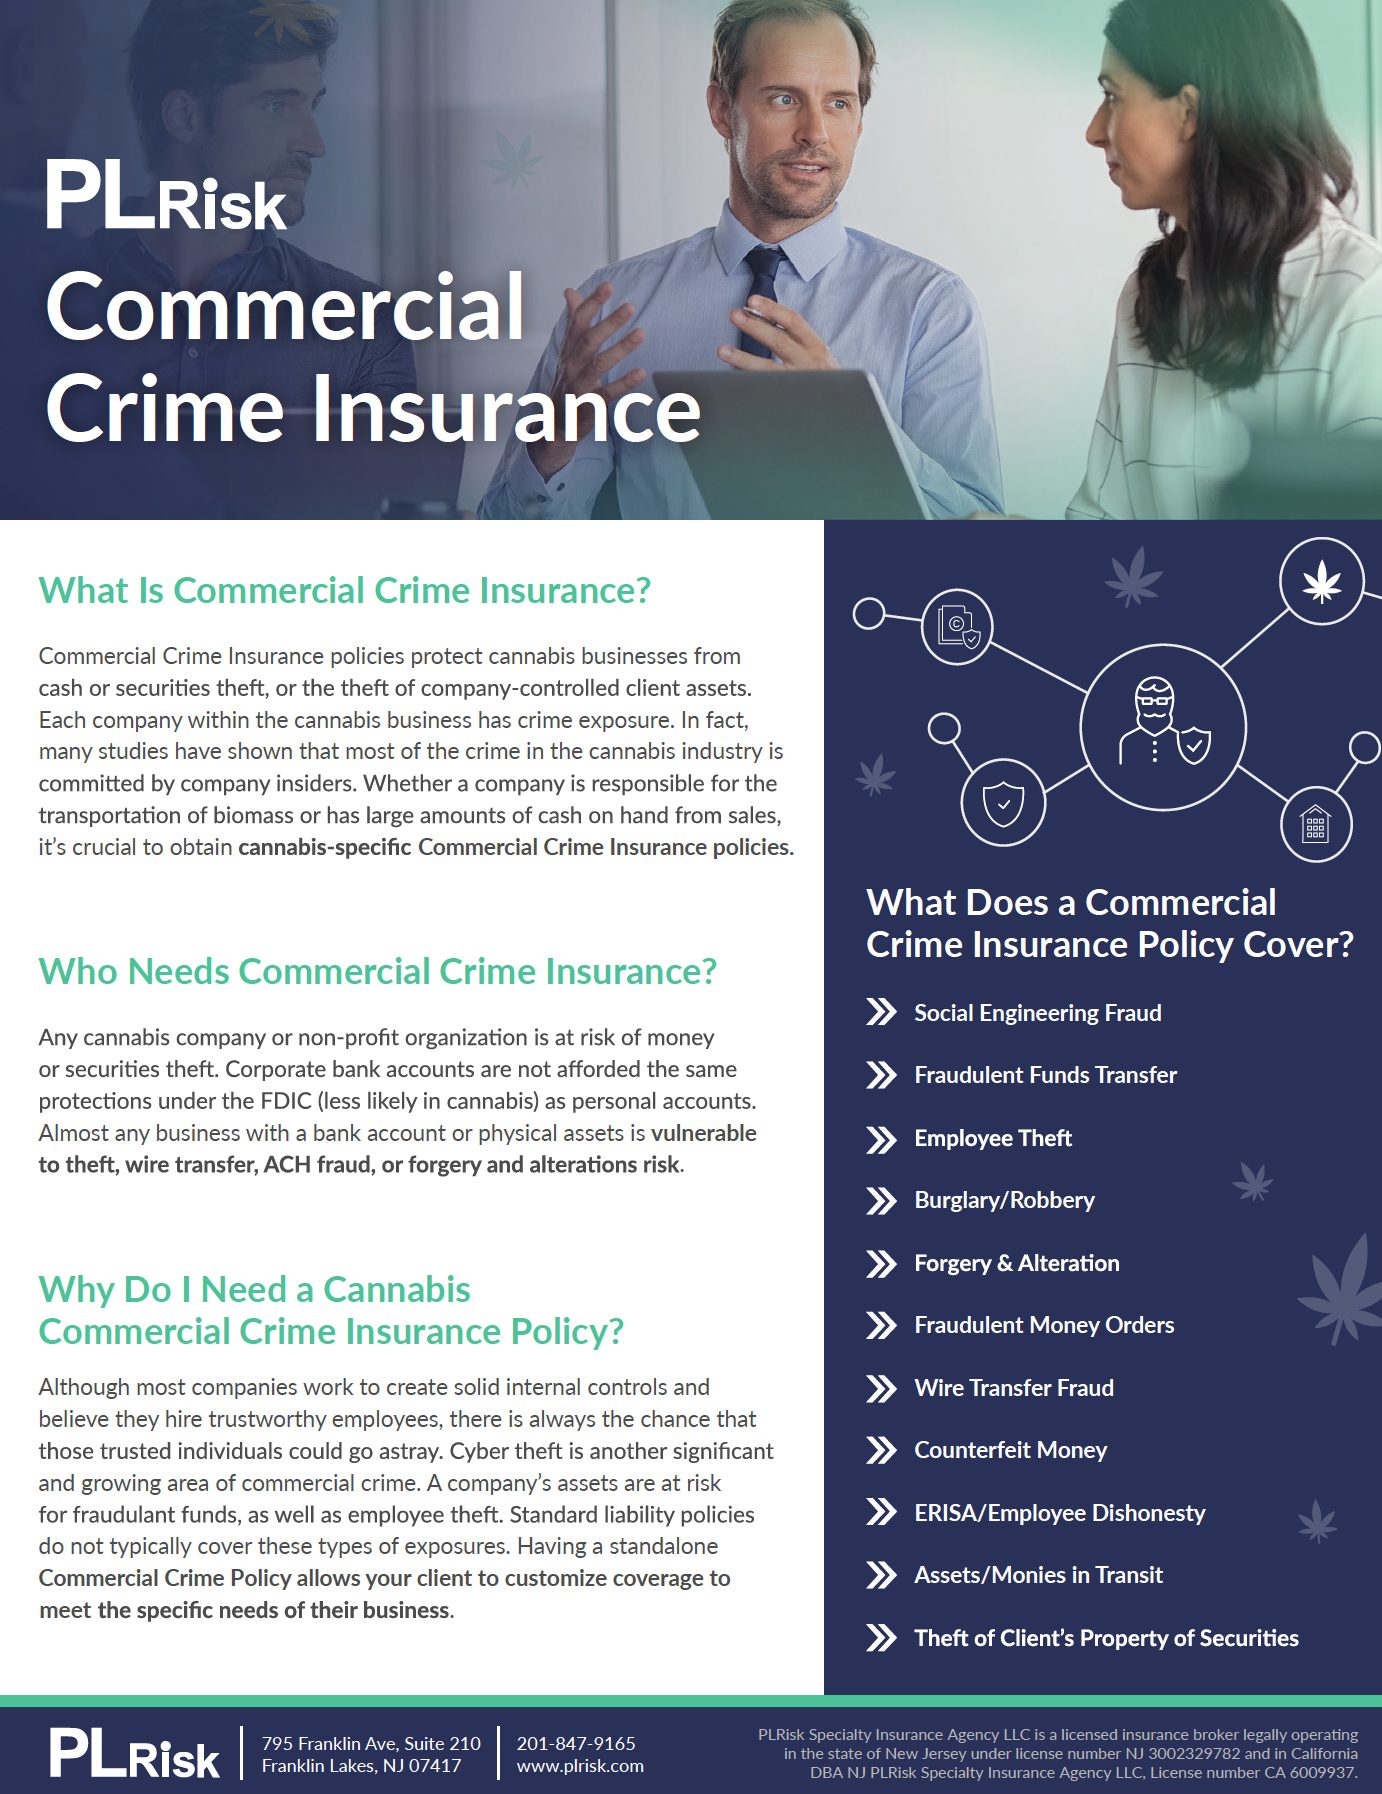 CANNABIS COMMERCIAL CRIME INSURANCE GUIDE